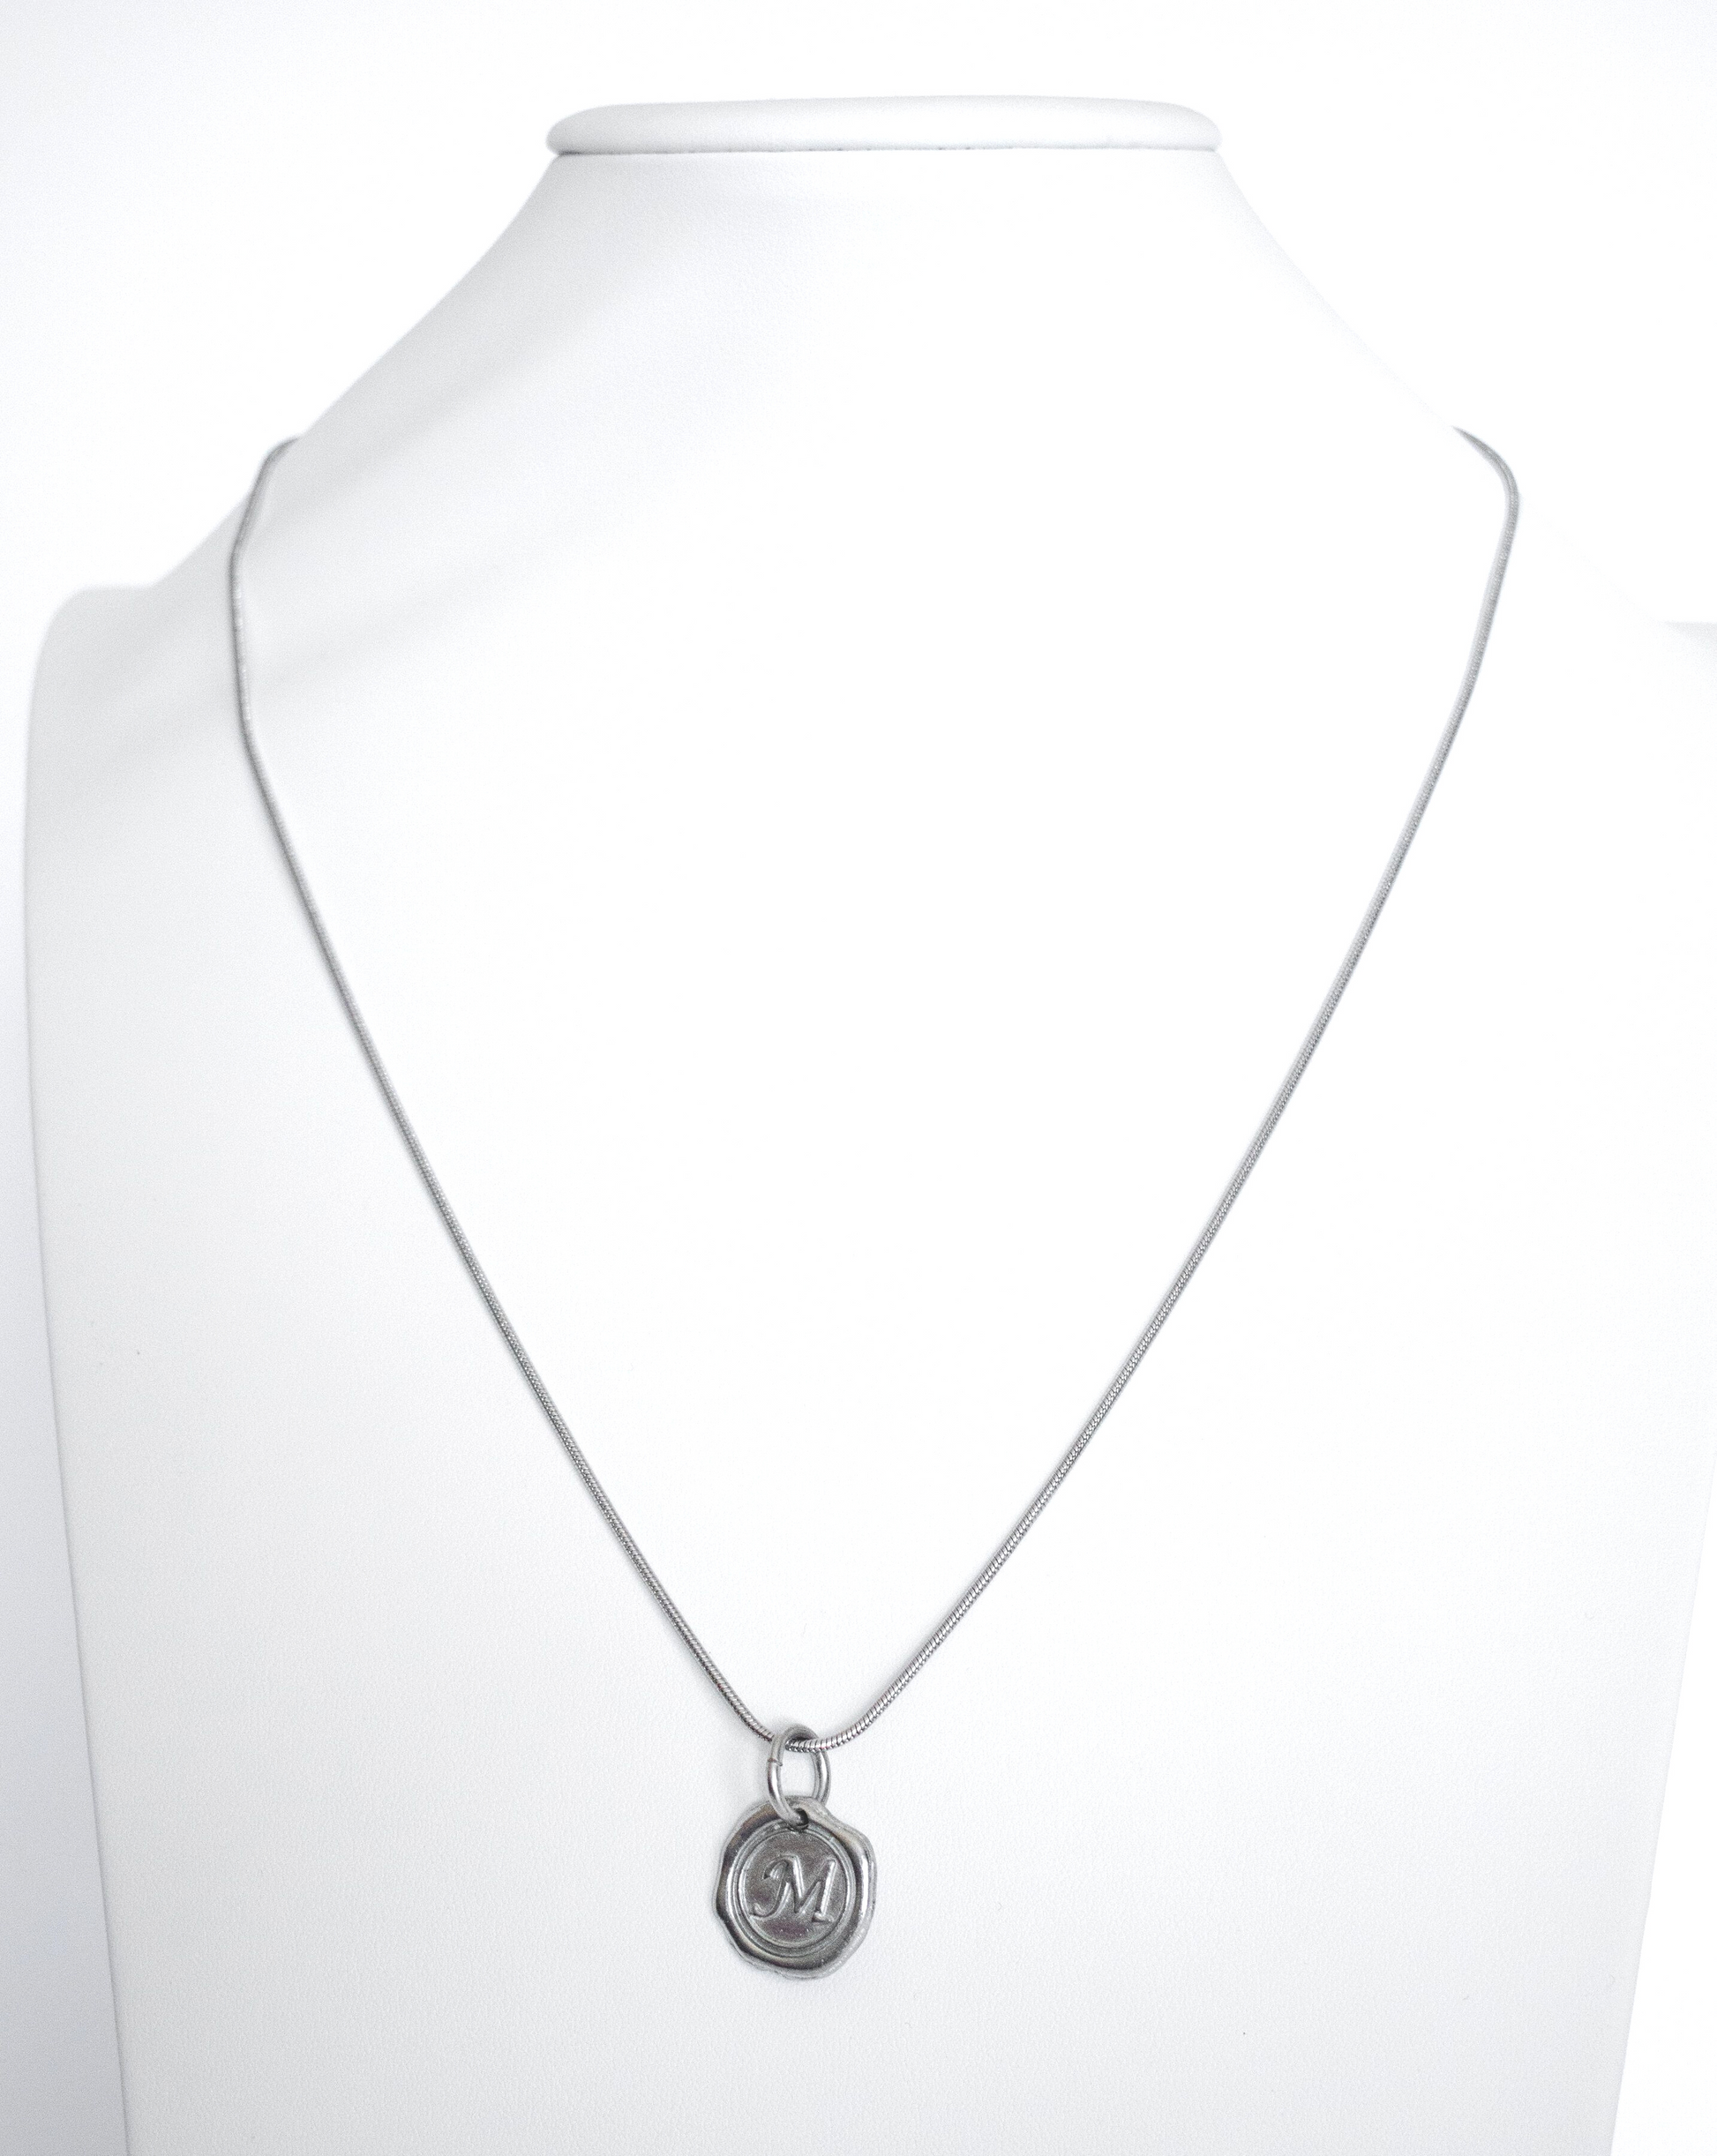 Handmade Pewter Wax Seal Monogram Initial Necklace- Jewelry - House of Morgan Pewter